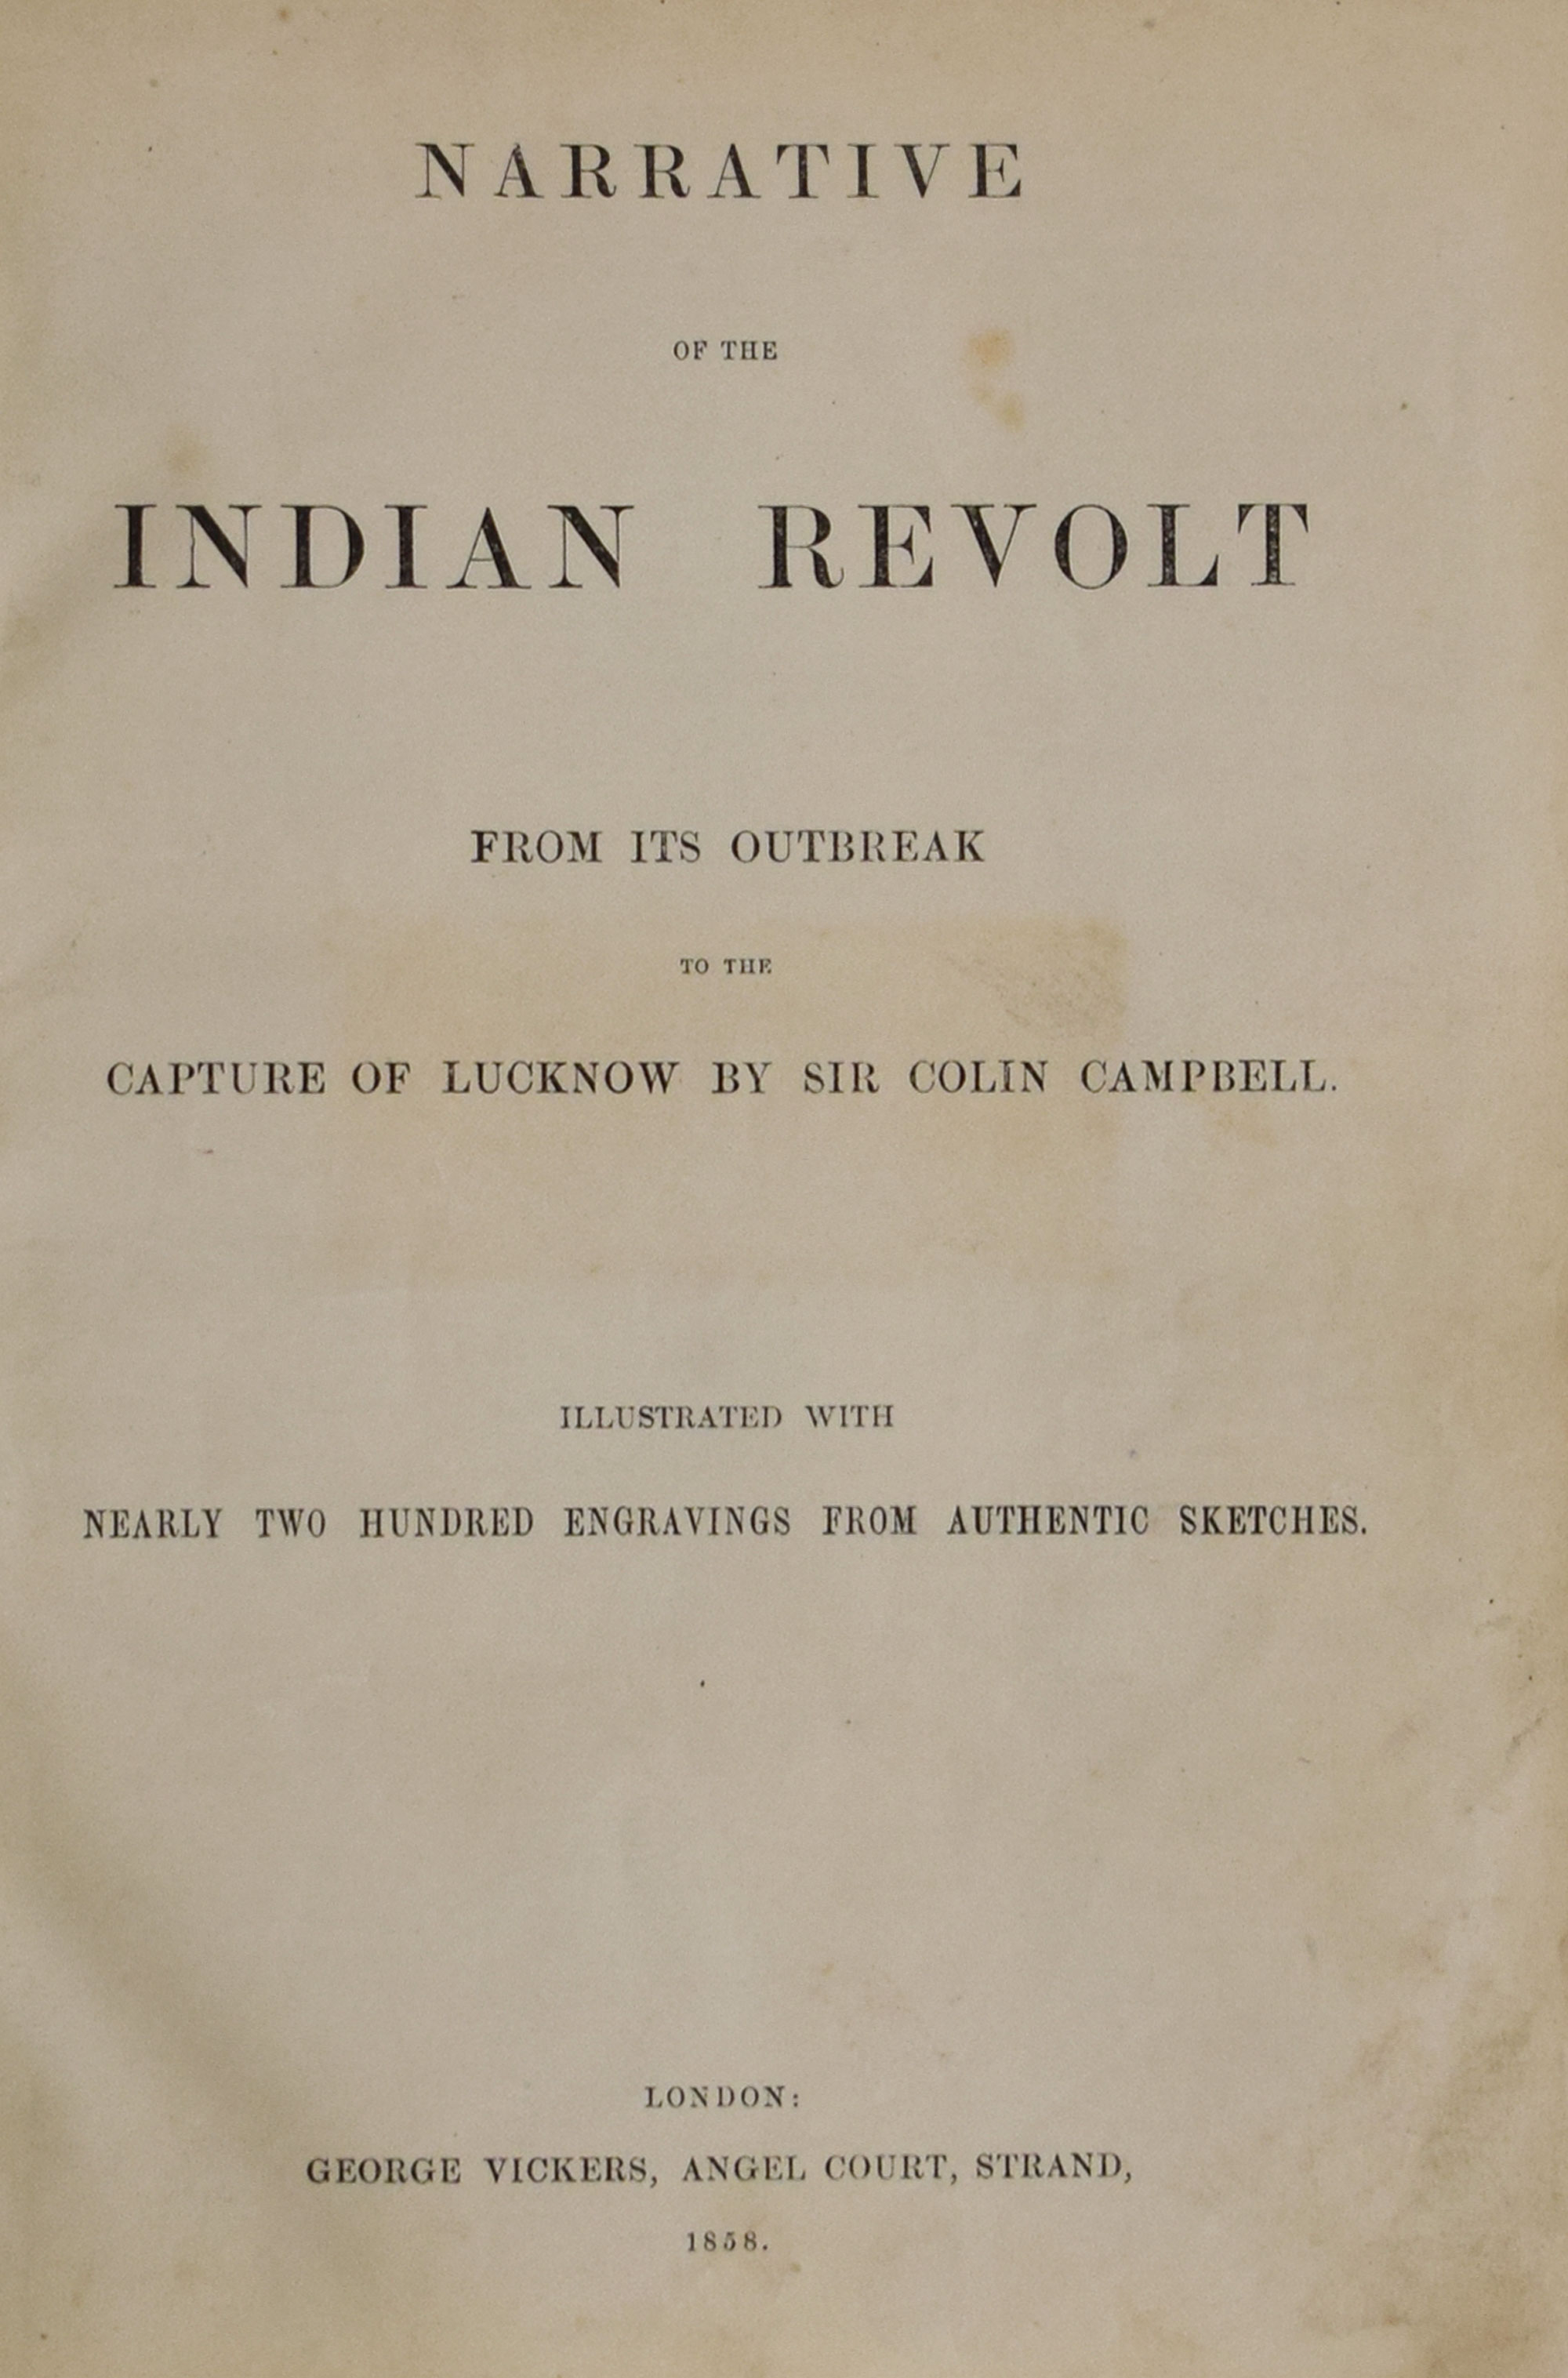 Narrative of the Indian Revolt from its Outbreak to the Capture of Lucknow